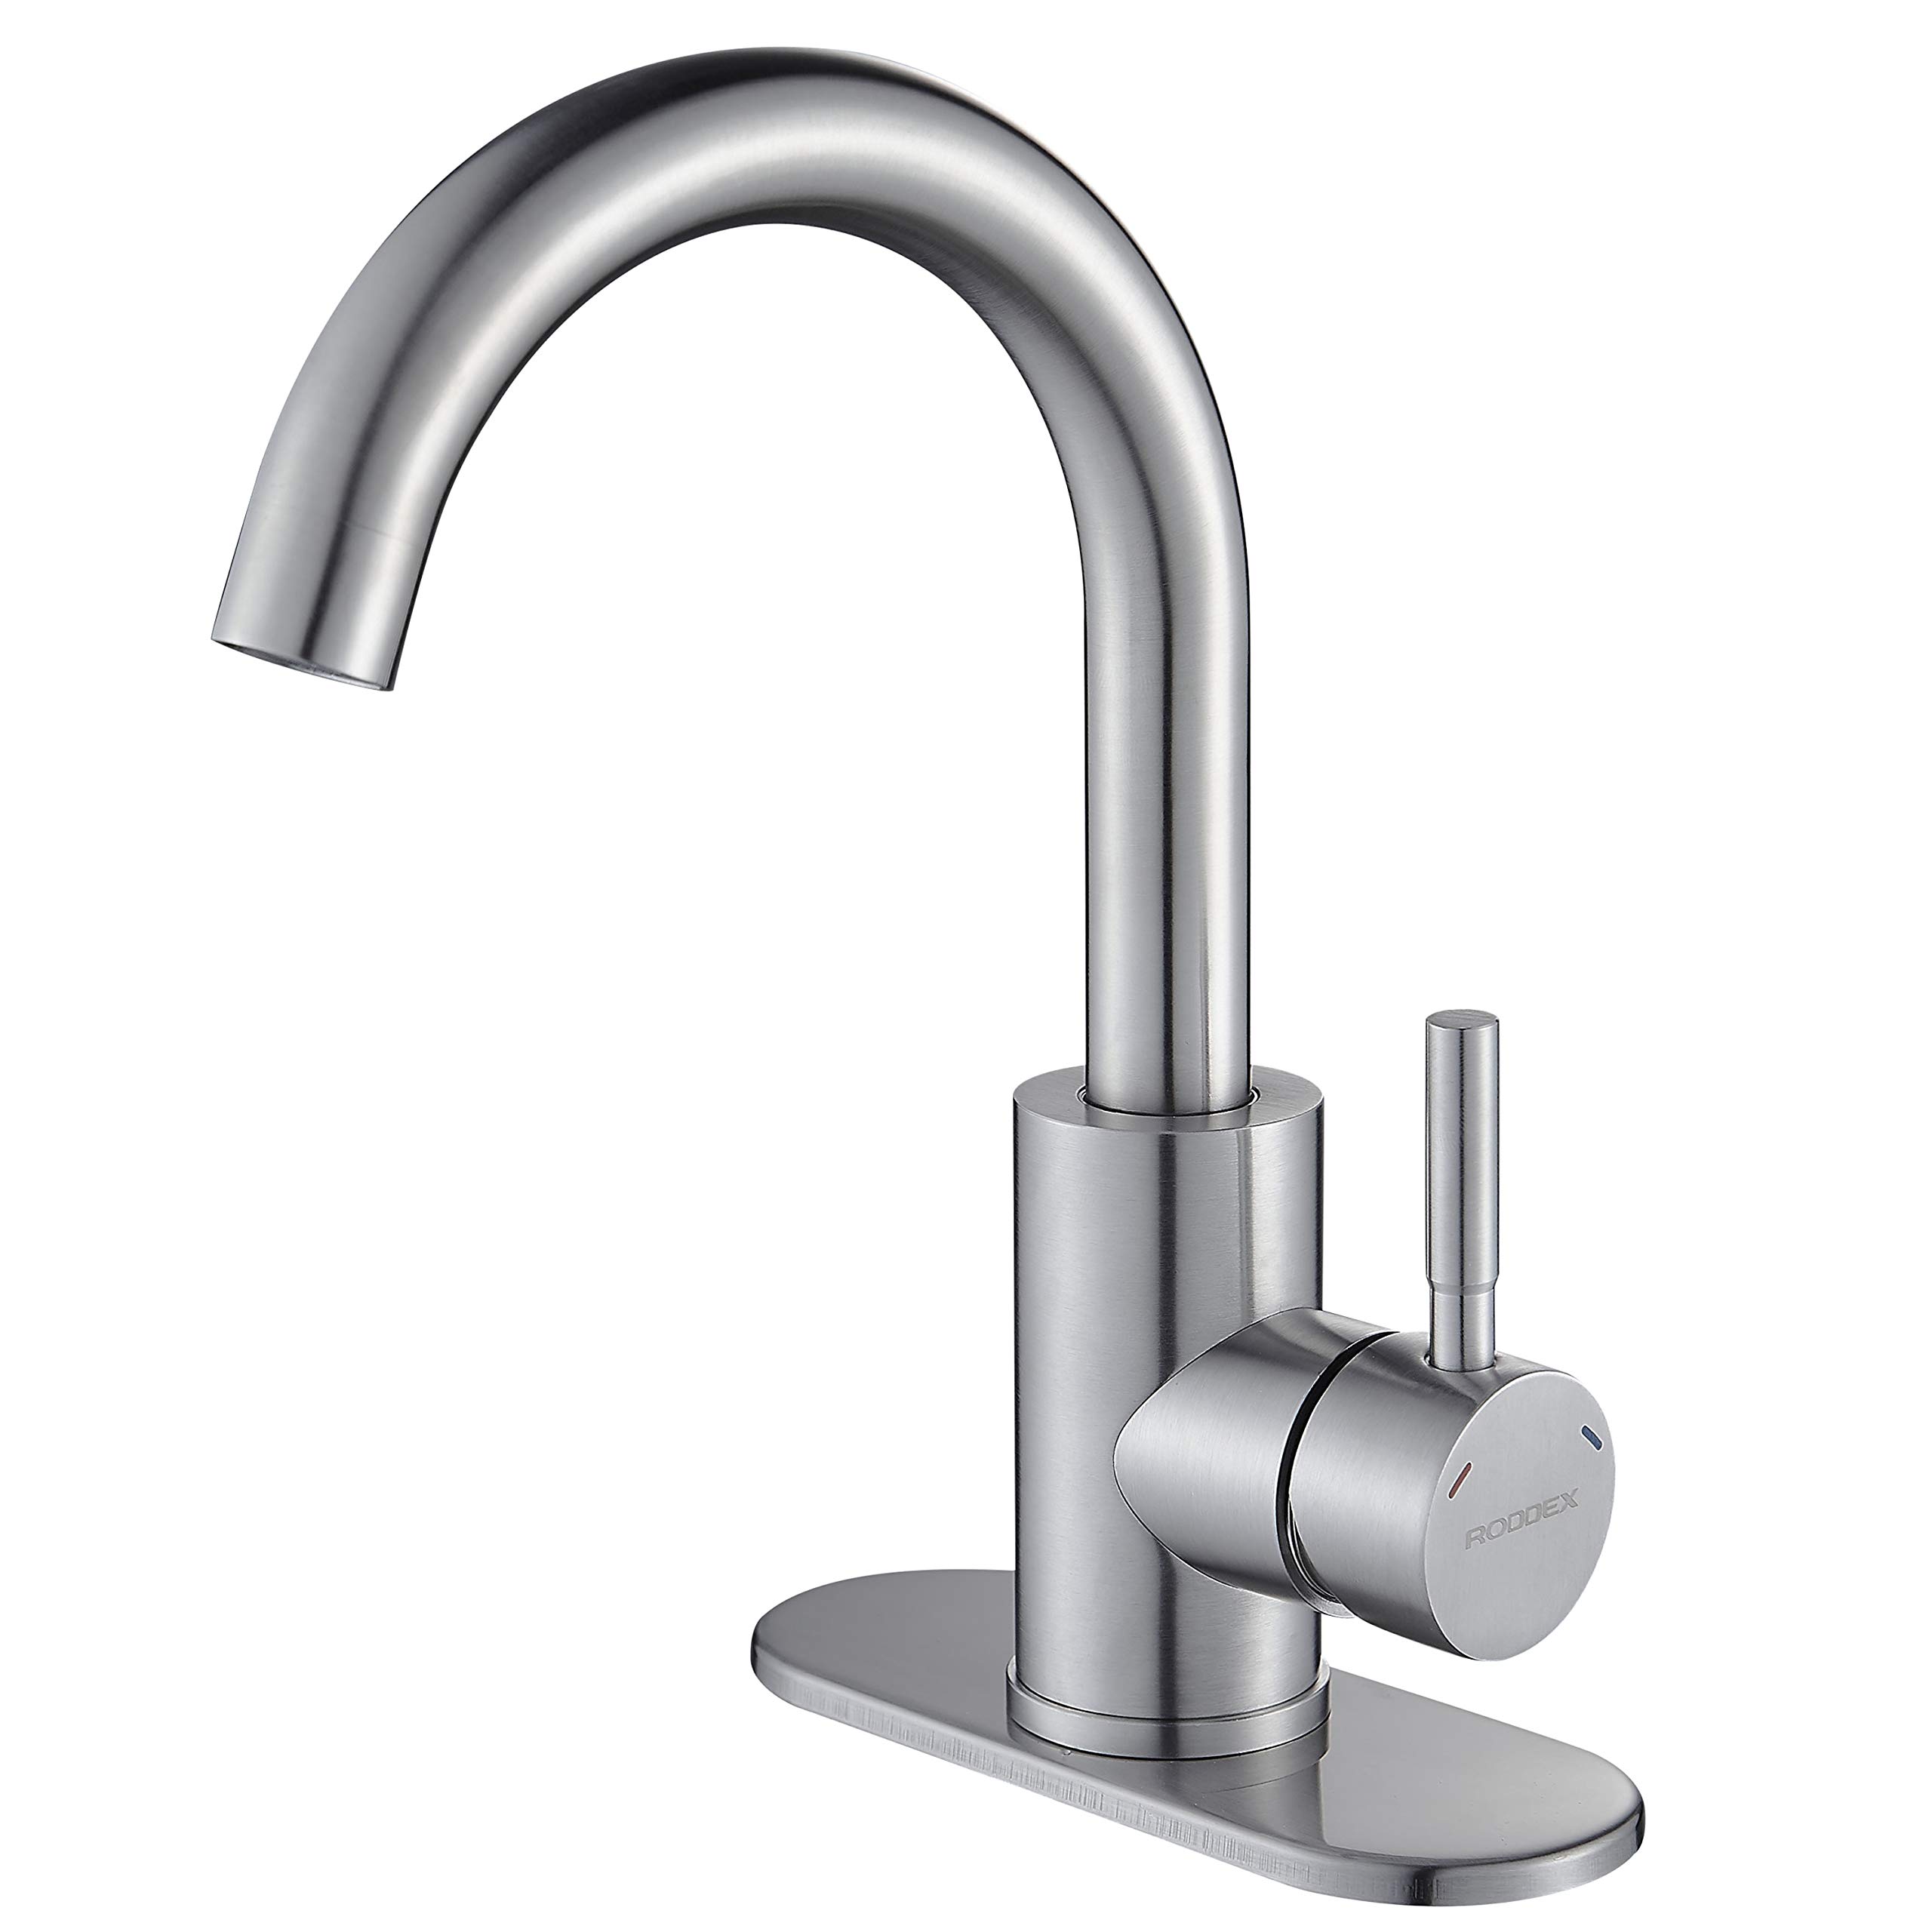 RODDEX Wet Bar Sink Faucet, Stainless Steel 360 Swivel Bar Mixer with 3 Hole Cover Deck Plate, Small Modern Single Handle Tap fo